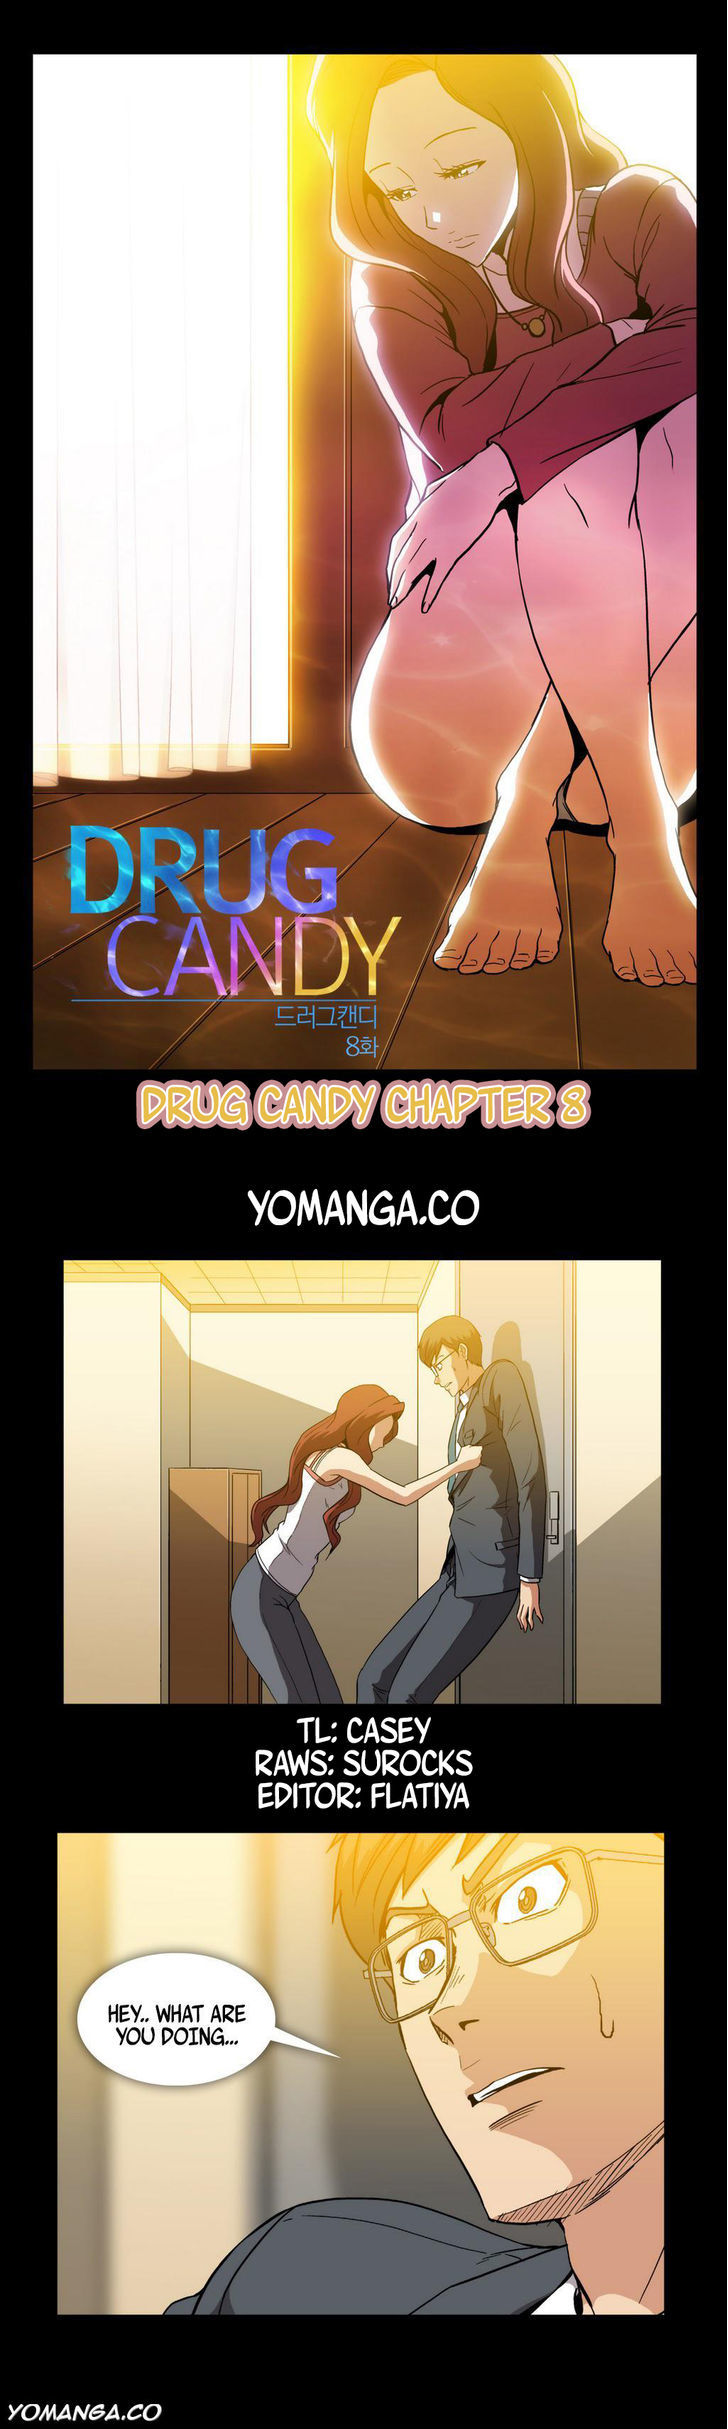 Drug Candy - Chapter 8 Page 2